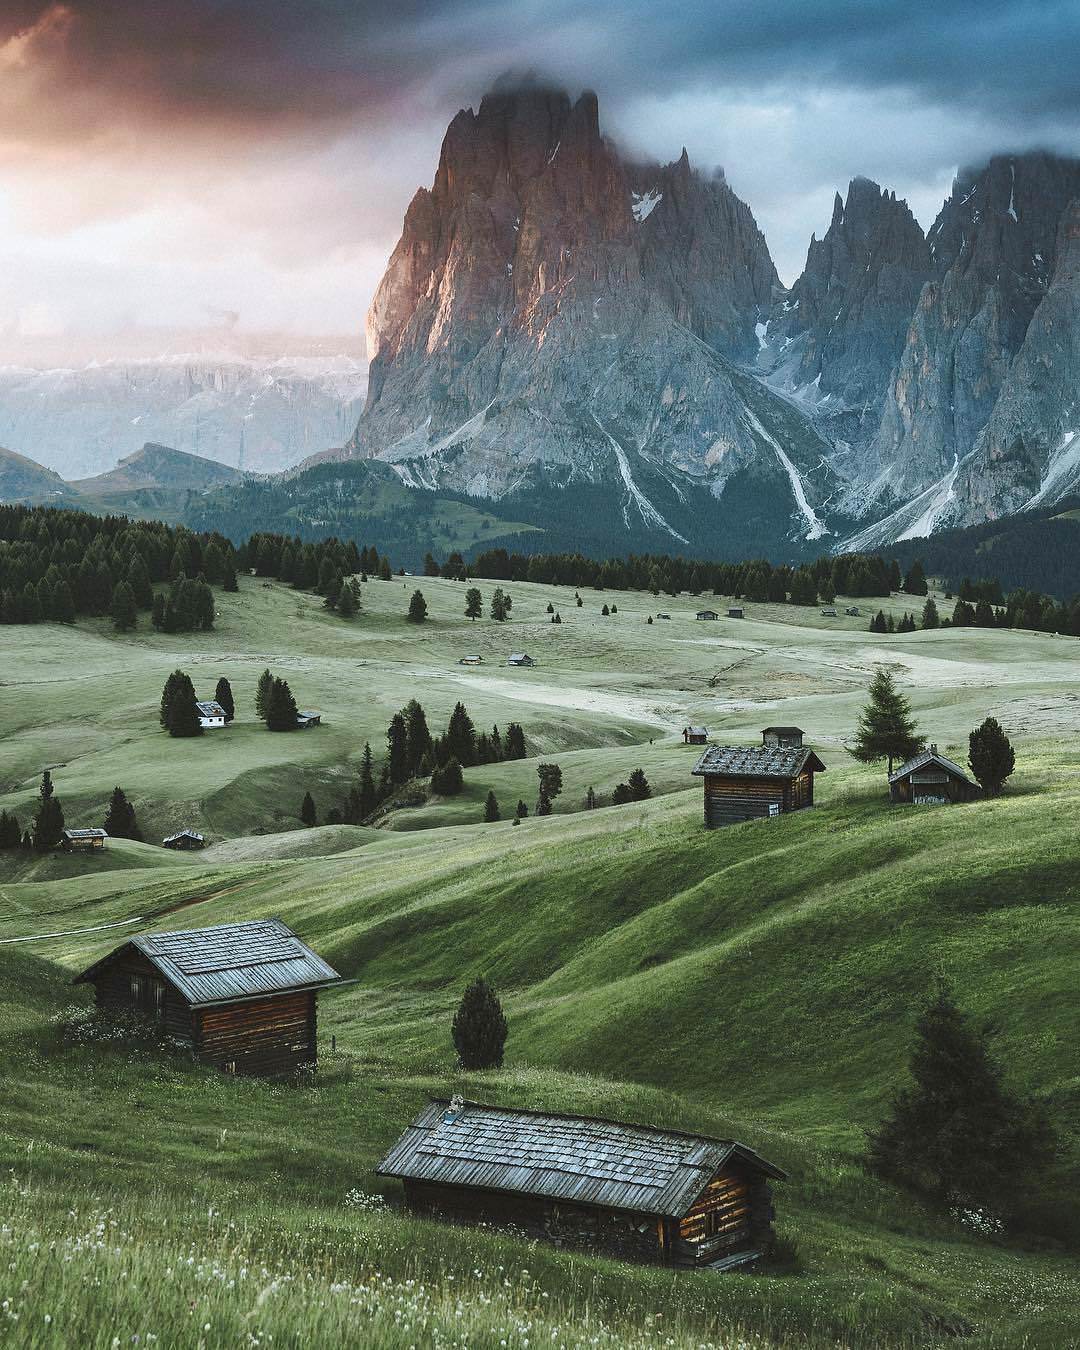 Sunrise in South Tyrol, Italy.